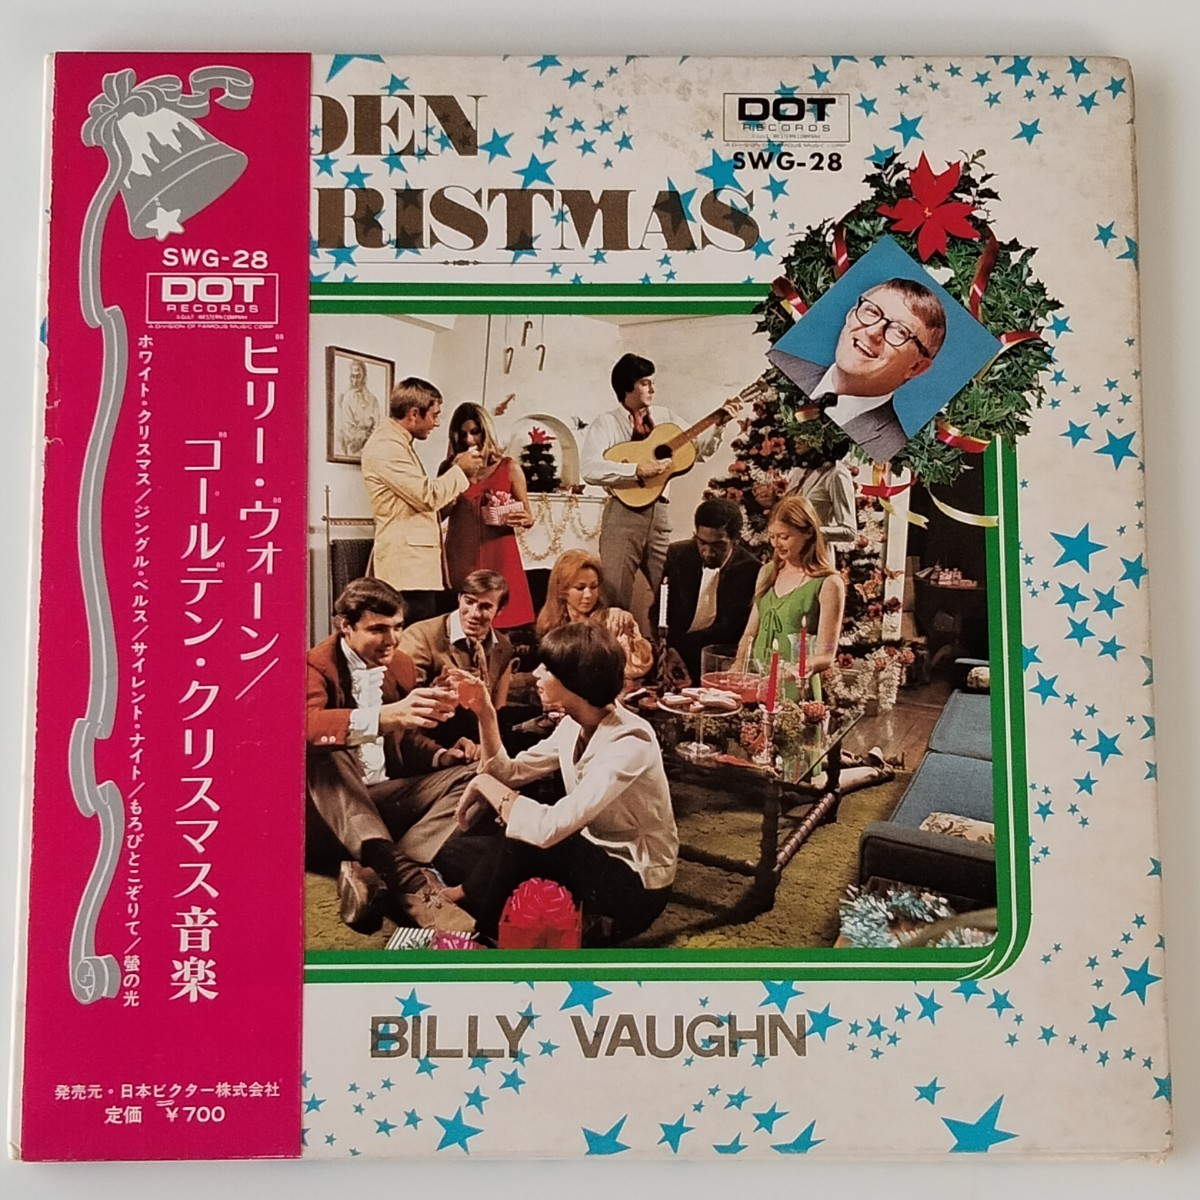 【7inch】BILLY VAUGHN/GOLDEN CHRISTMAS(SWG-28)ビリー・ヴォーン/ゴールデン・クリスマス音楽WIITE CHRISTMAS,JINGLE BELLS,SILENT NIGHT_画像1